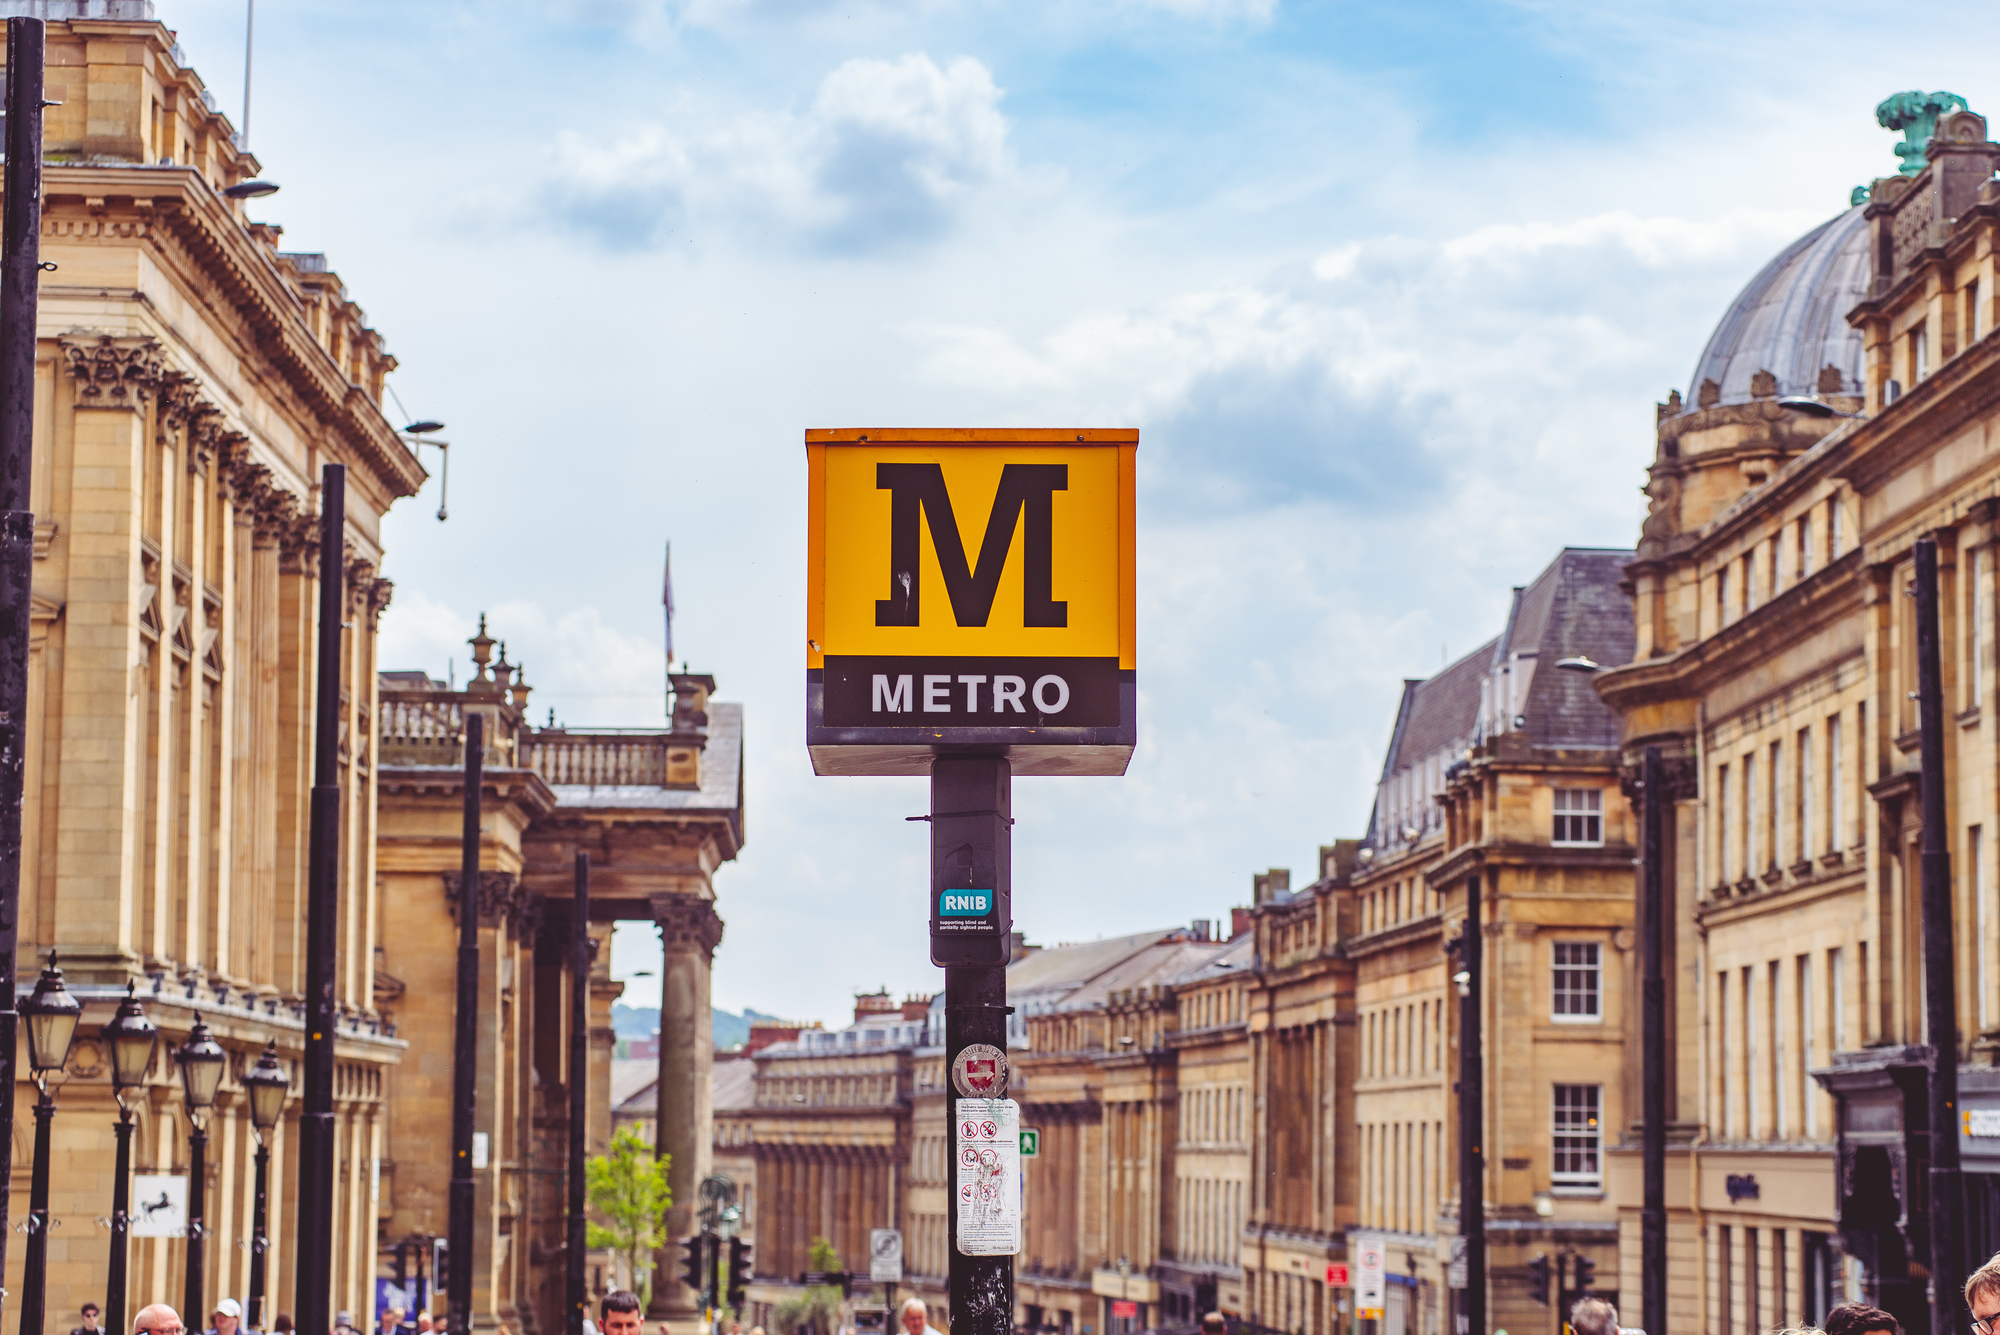 The Metro sign for monument station, framed by the honey-stone facades of Grey